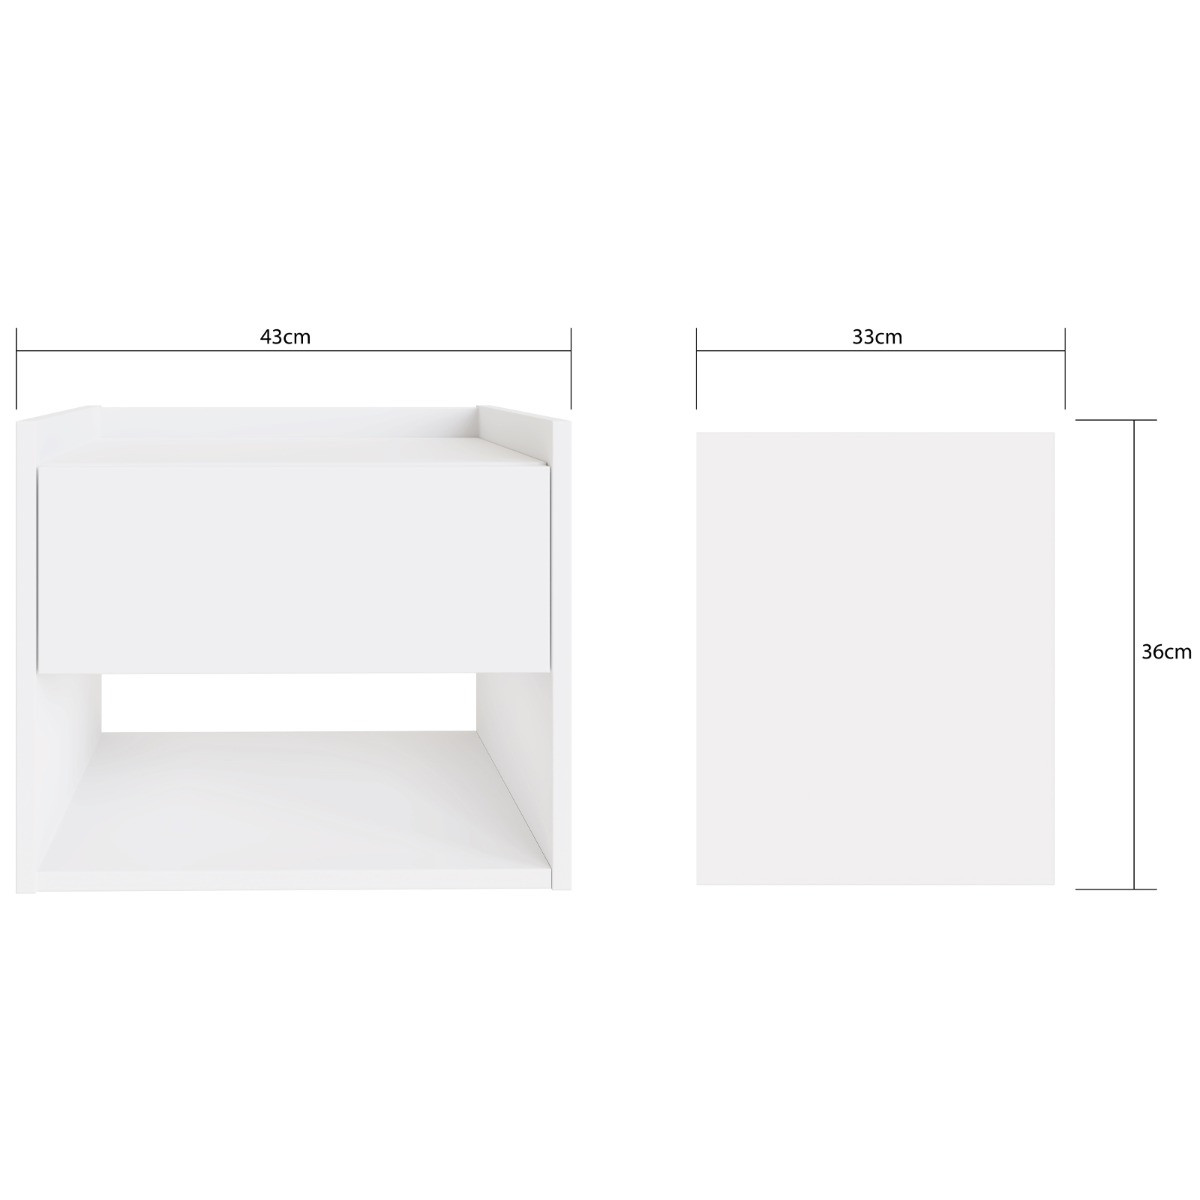 Harmony Pair Of Wall Mounted Bedside Tables - White>